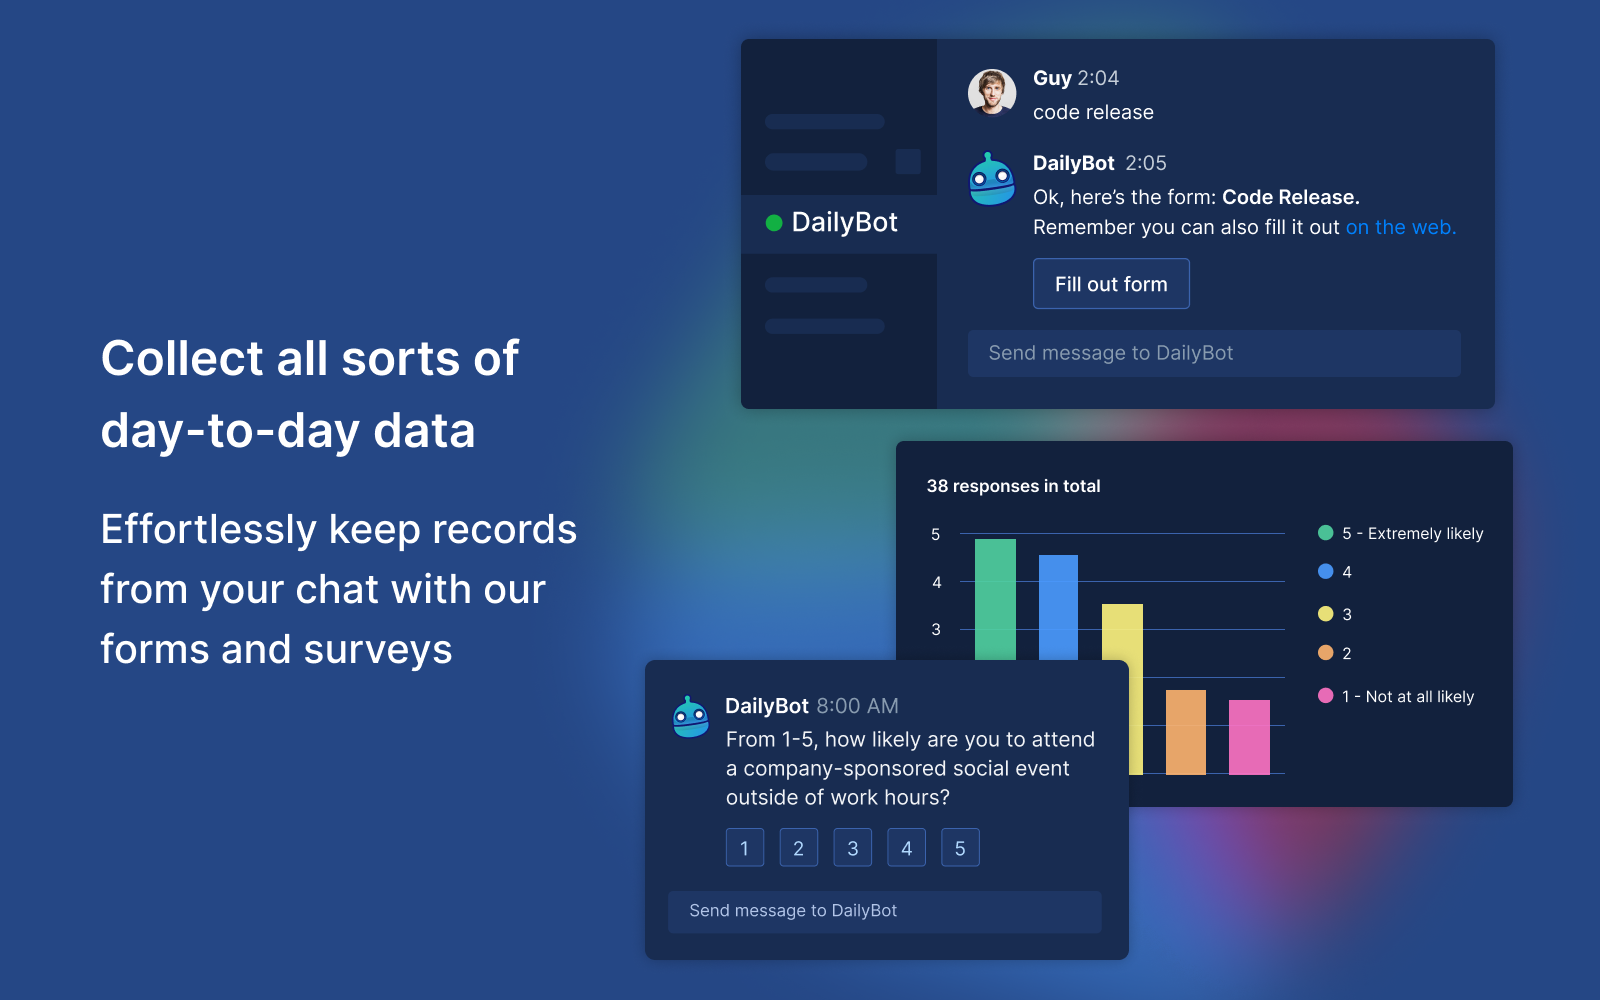 Collect all sorts of day-to-day data